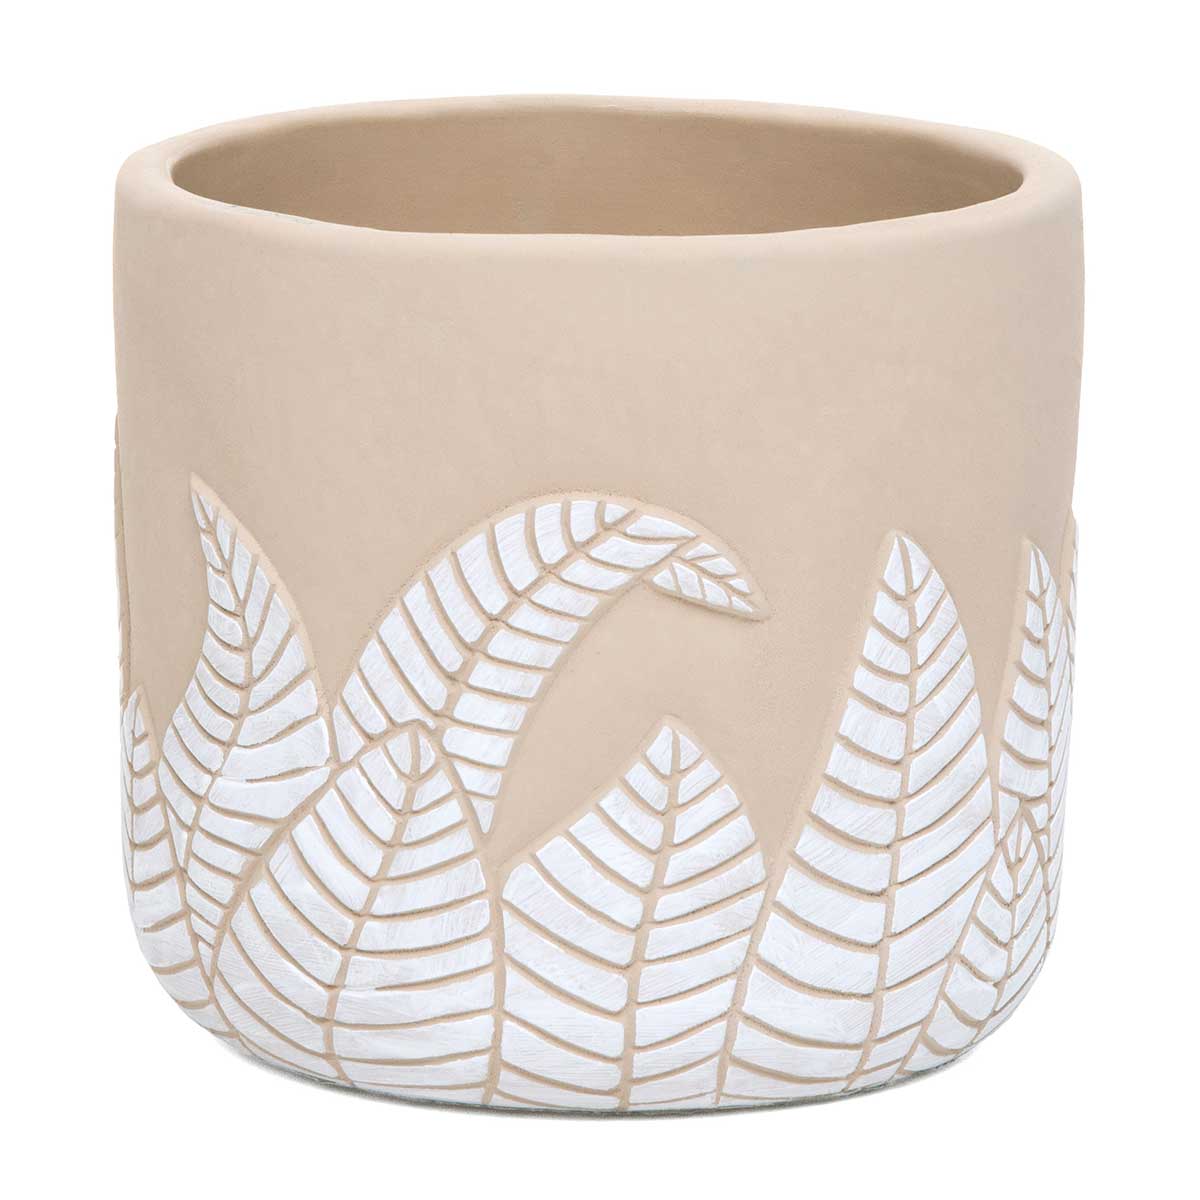 POT FITTONIA LEAF LARGE 5.5IN X 5IN SAND/WHITE CONCRETE - Click Image to Close